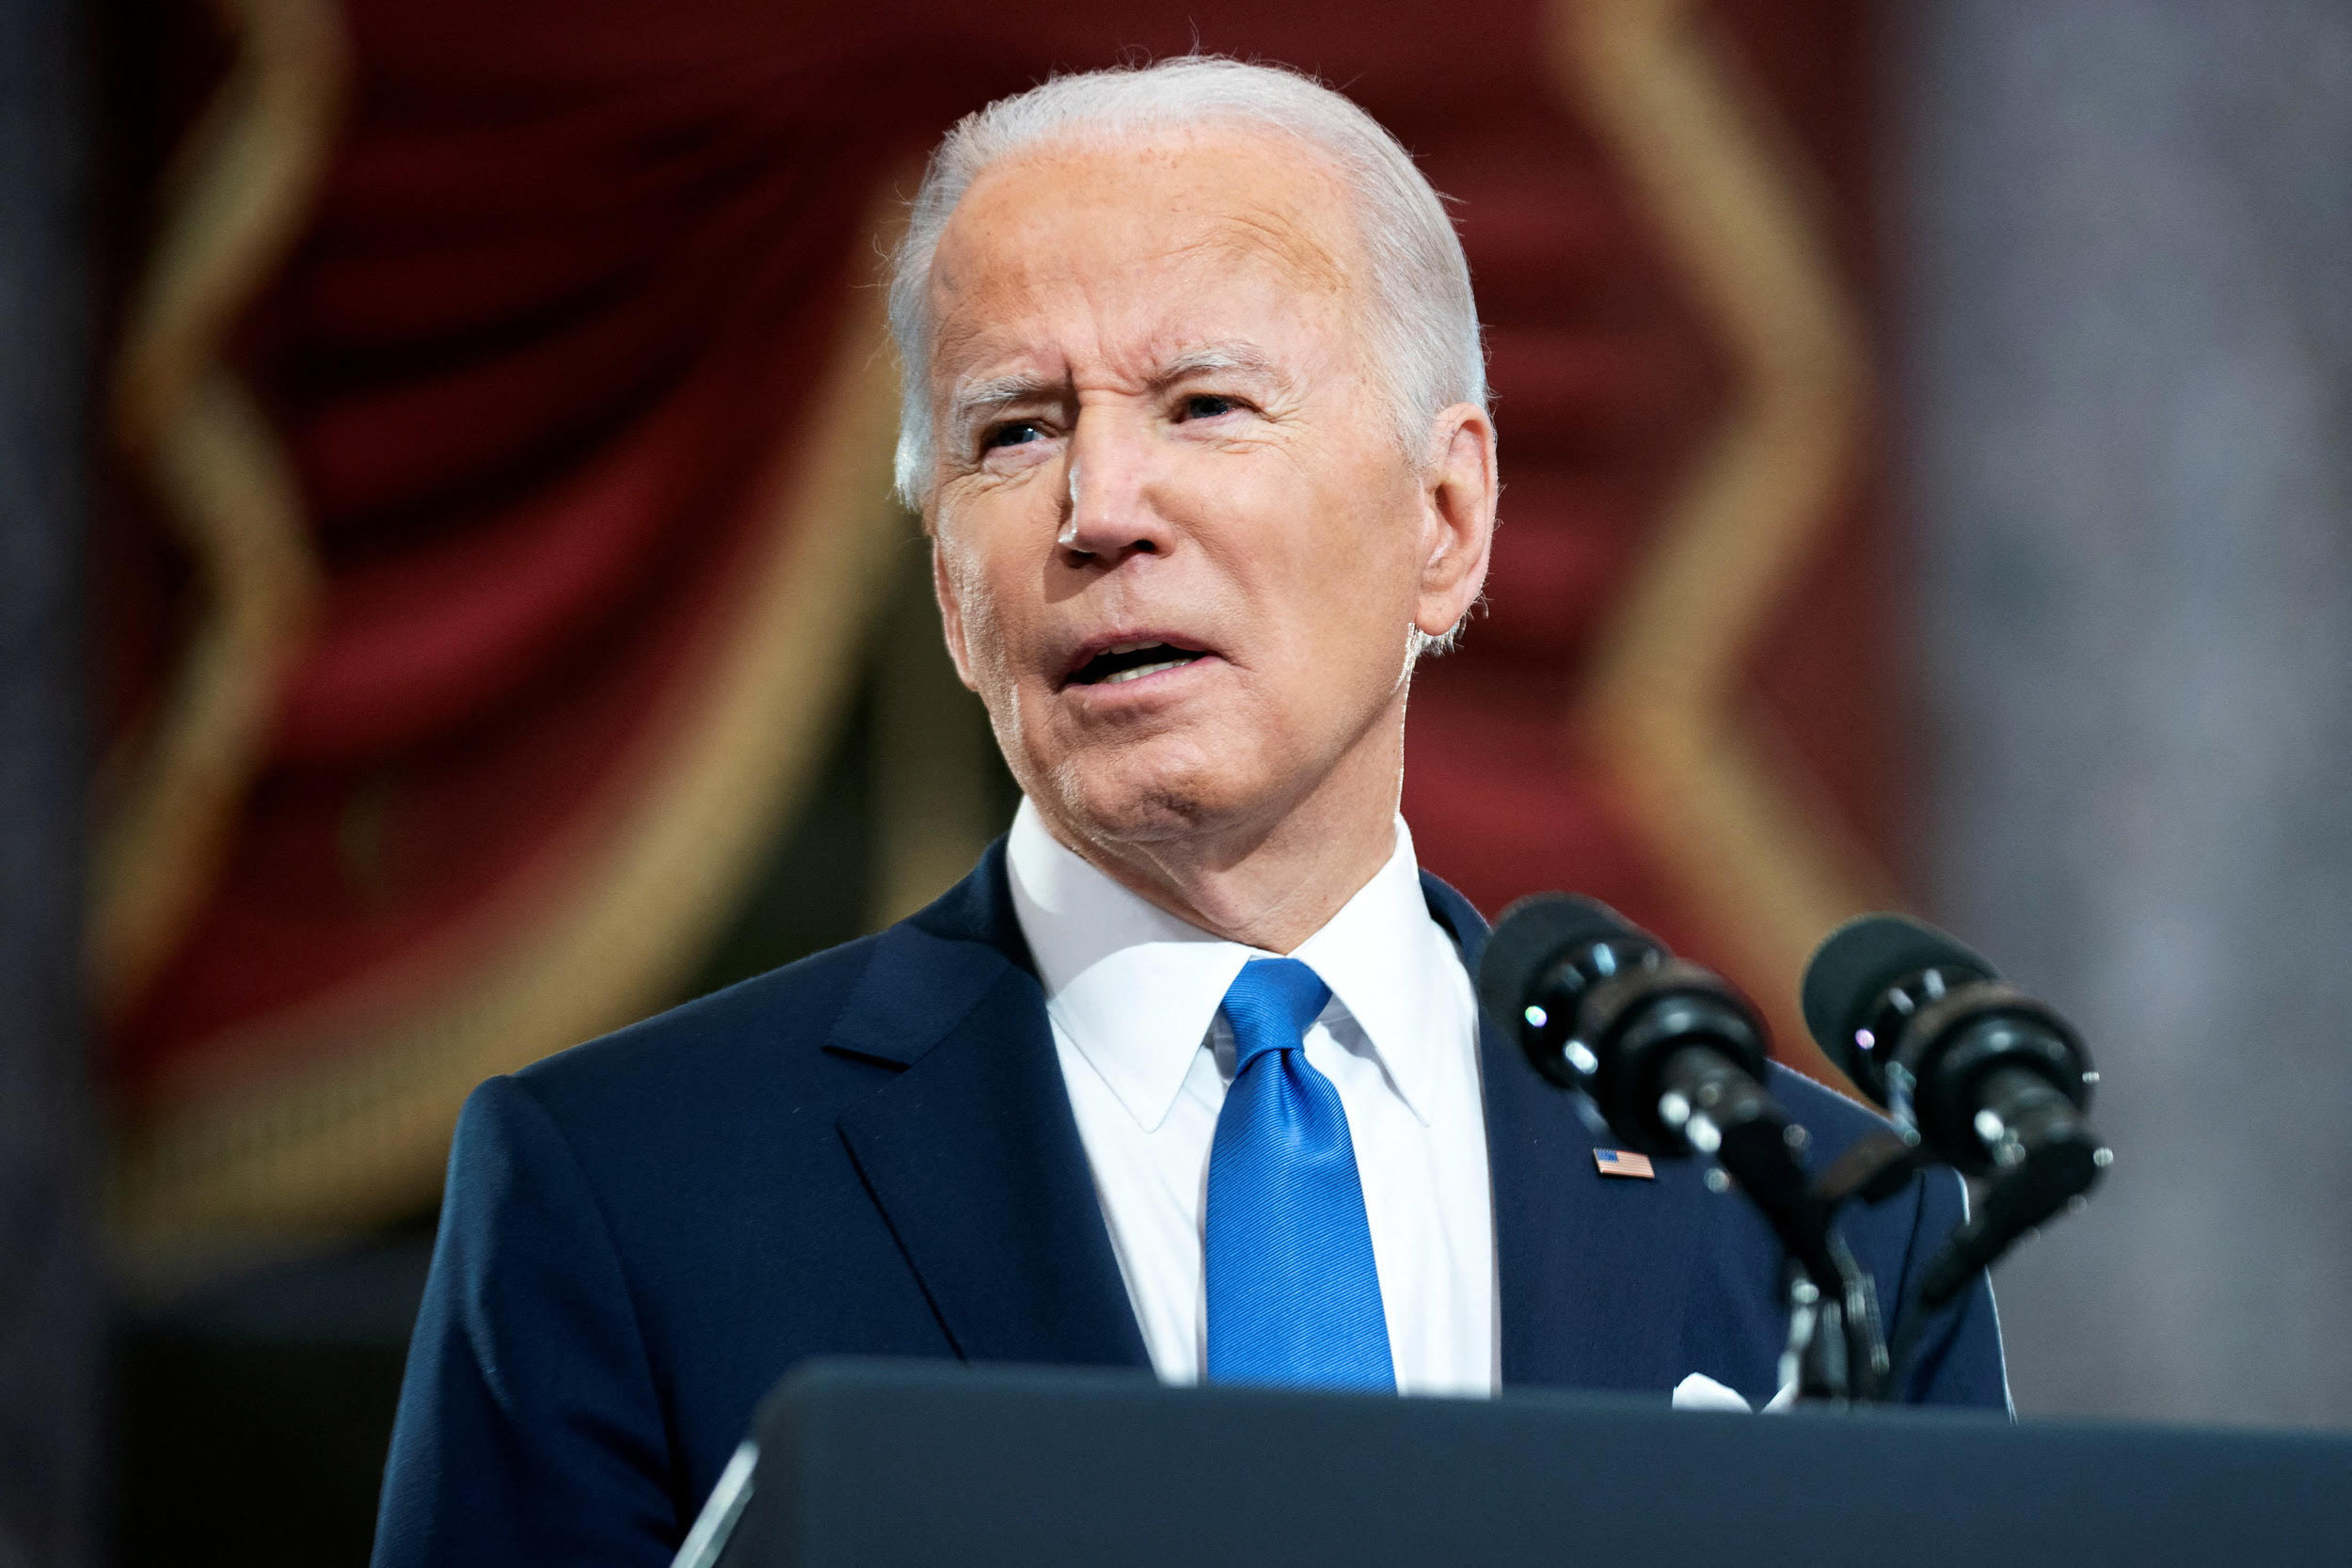 Are The Rumors About The Biden Crime Family True?